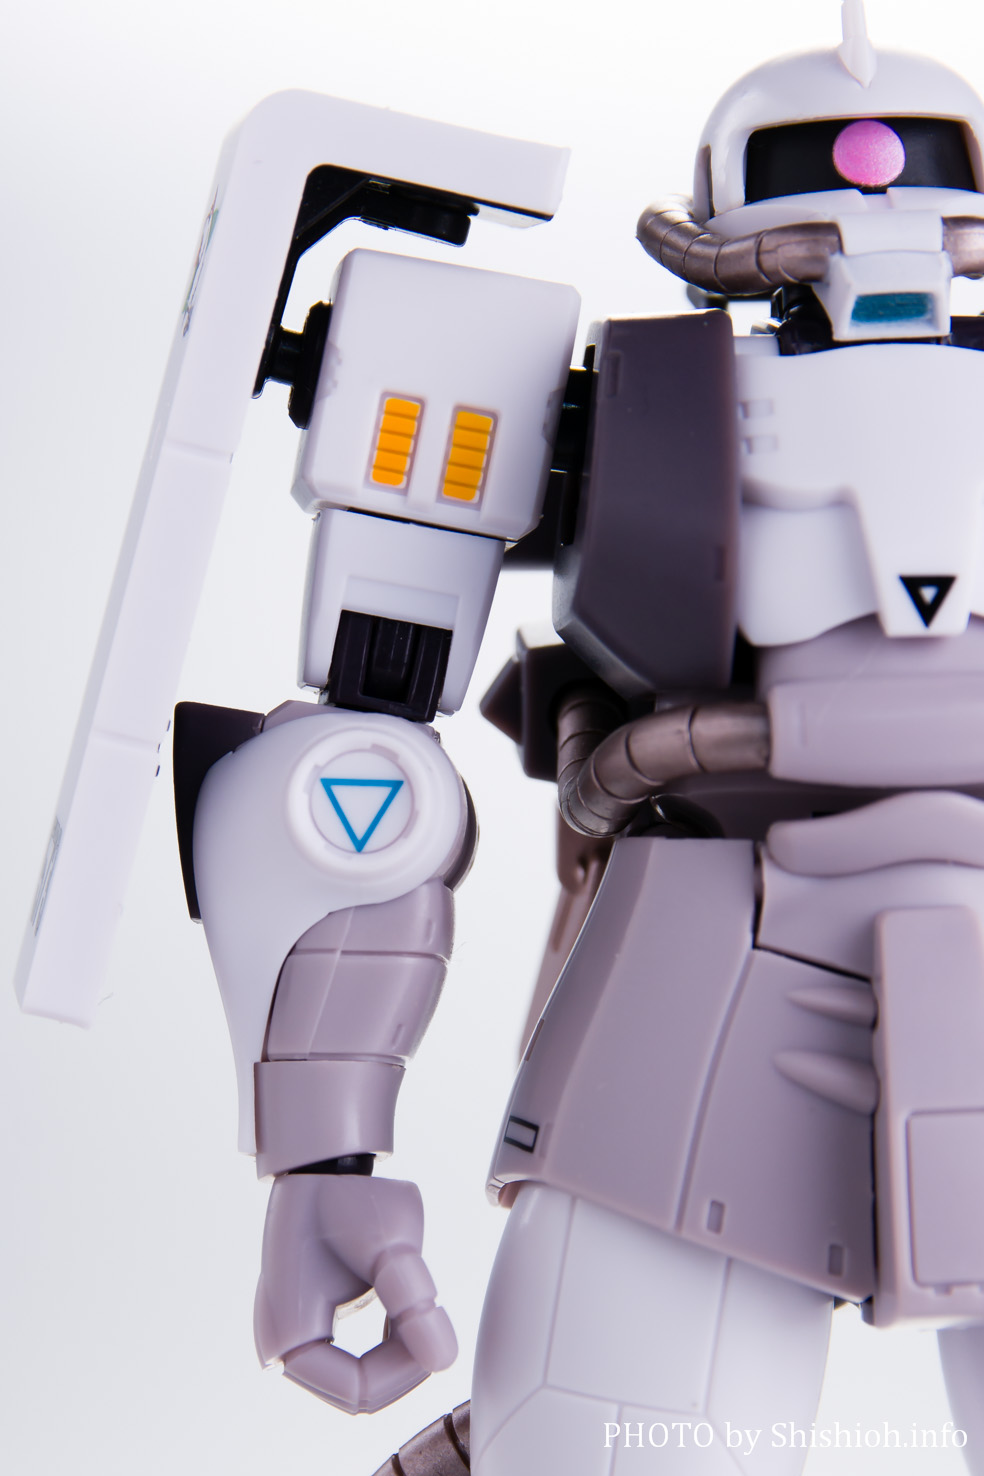 ROBOT魂 ＜SIDE MS＞ MS-06R-1A シン・マツナガ専用高機動型ザクII ver. A.N.I.M.E.